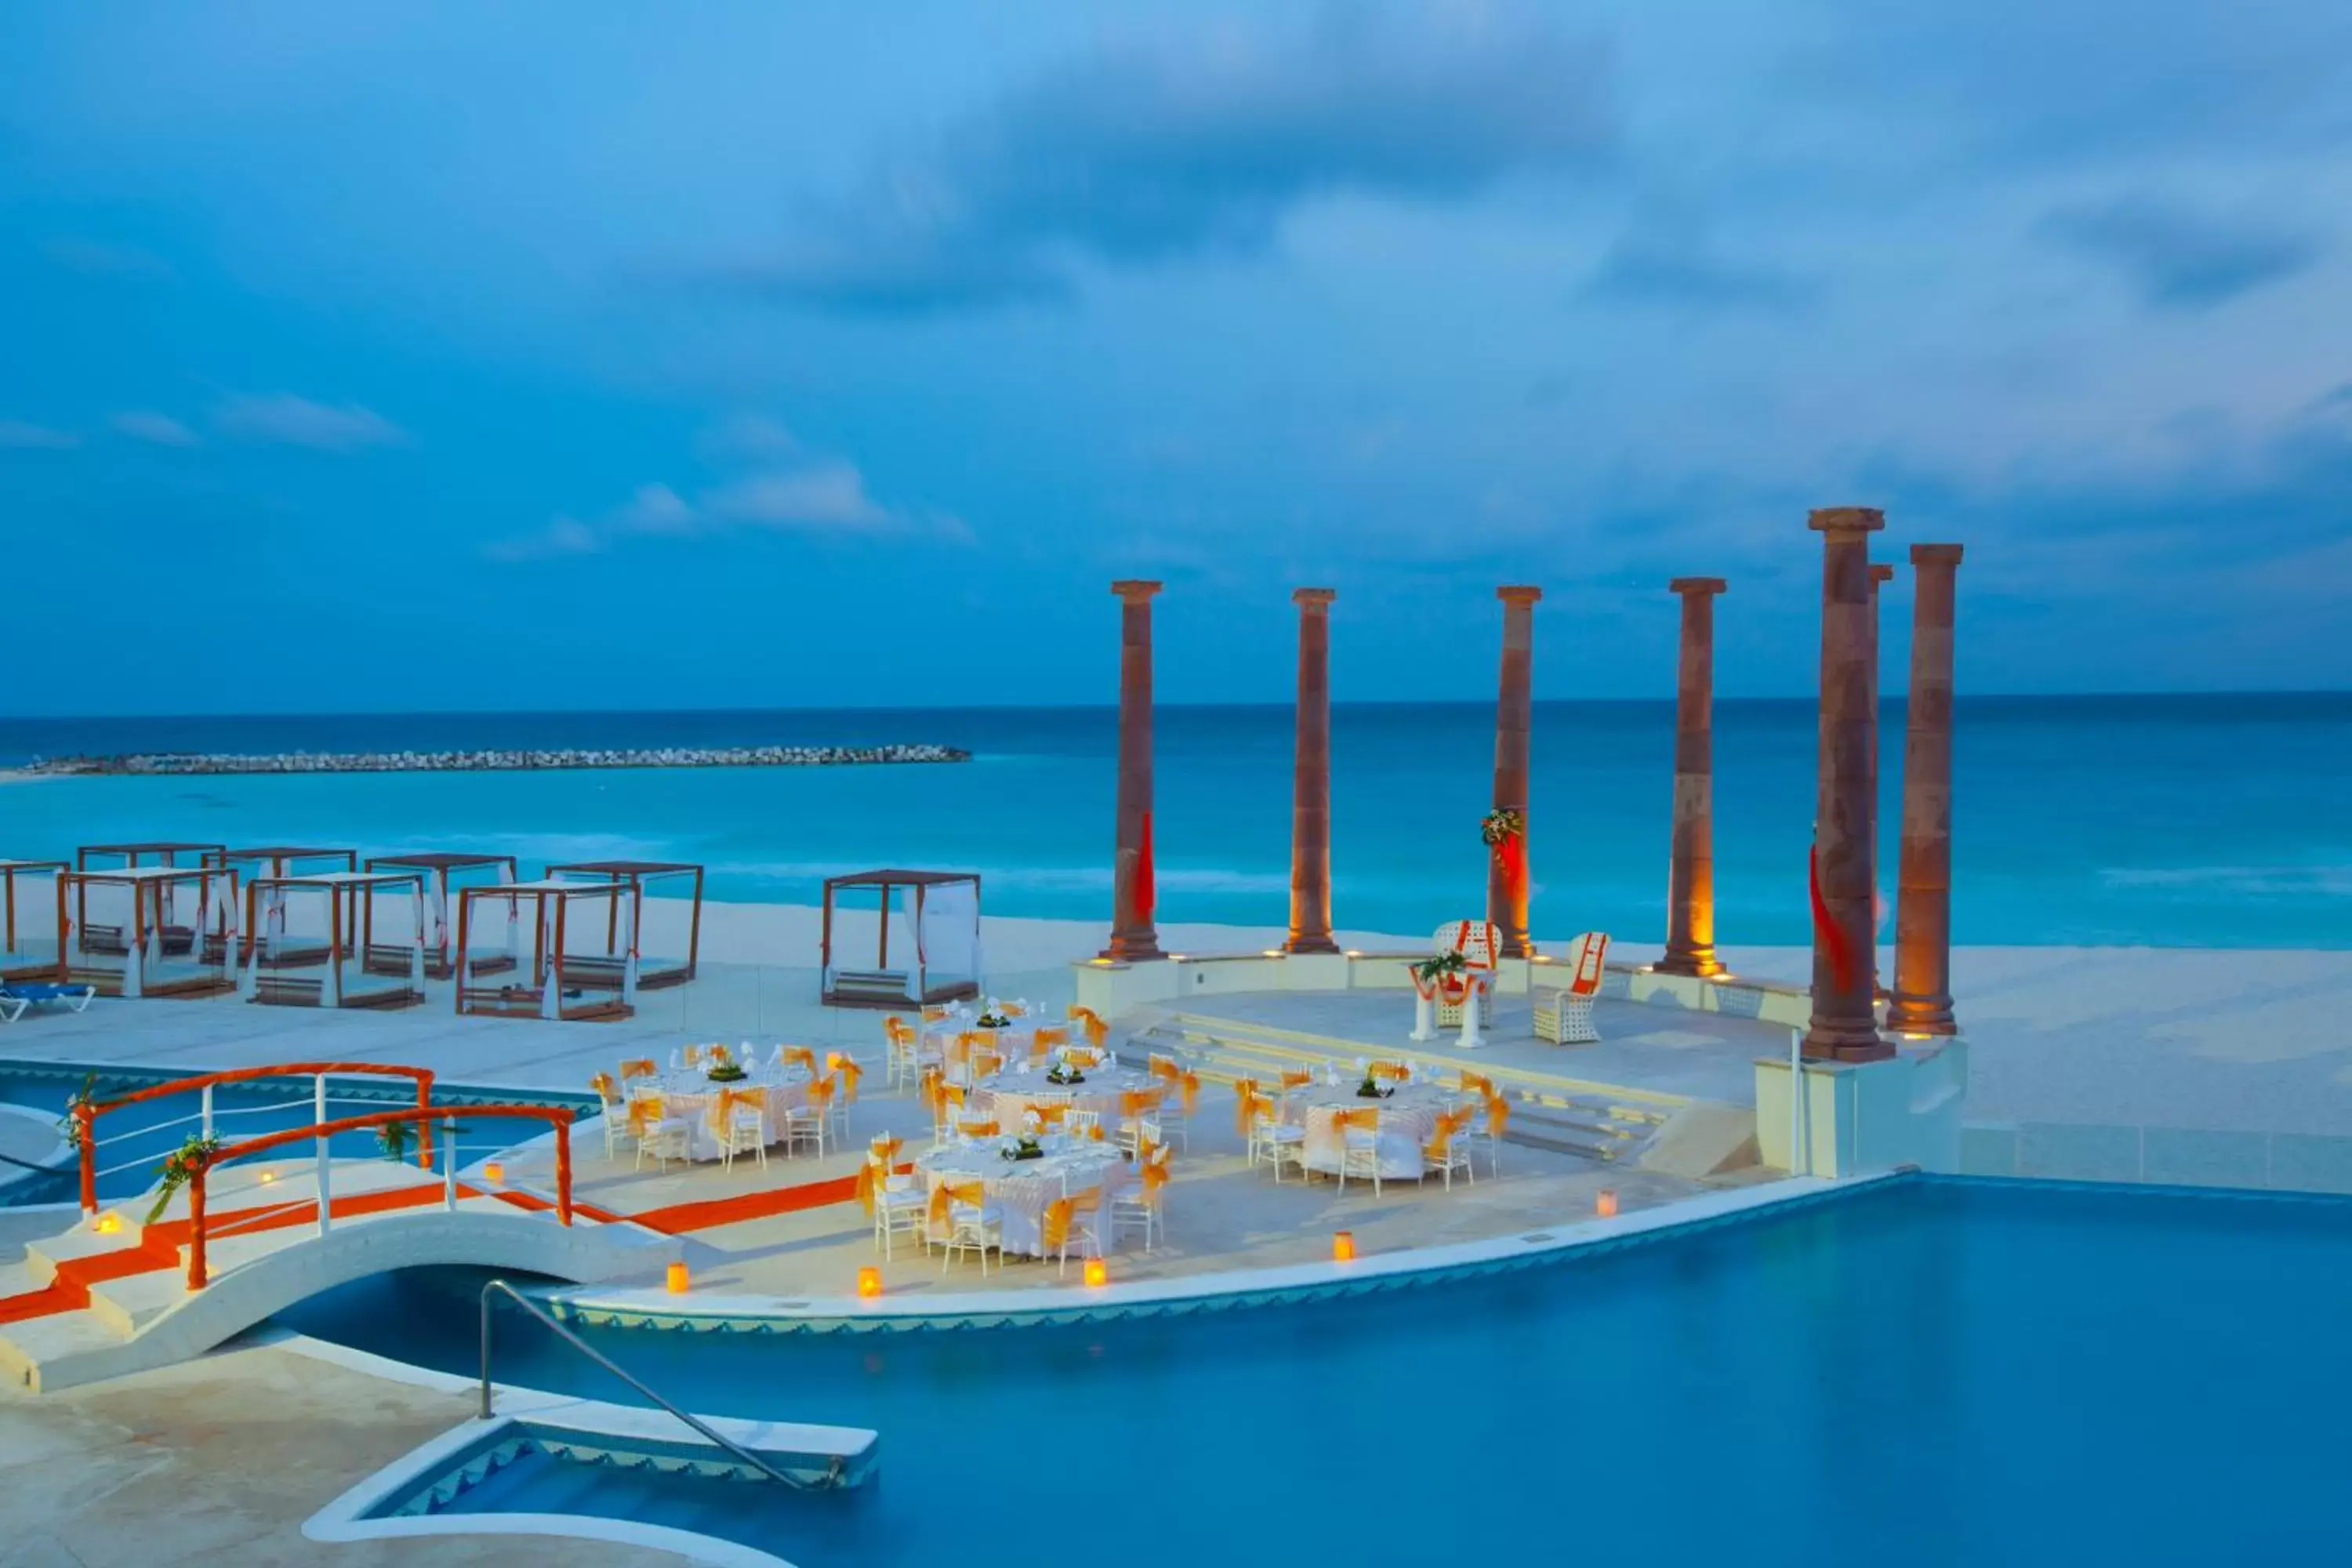 Banquet/Function facilities in Krystal Cancun